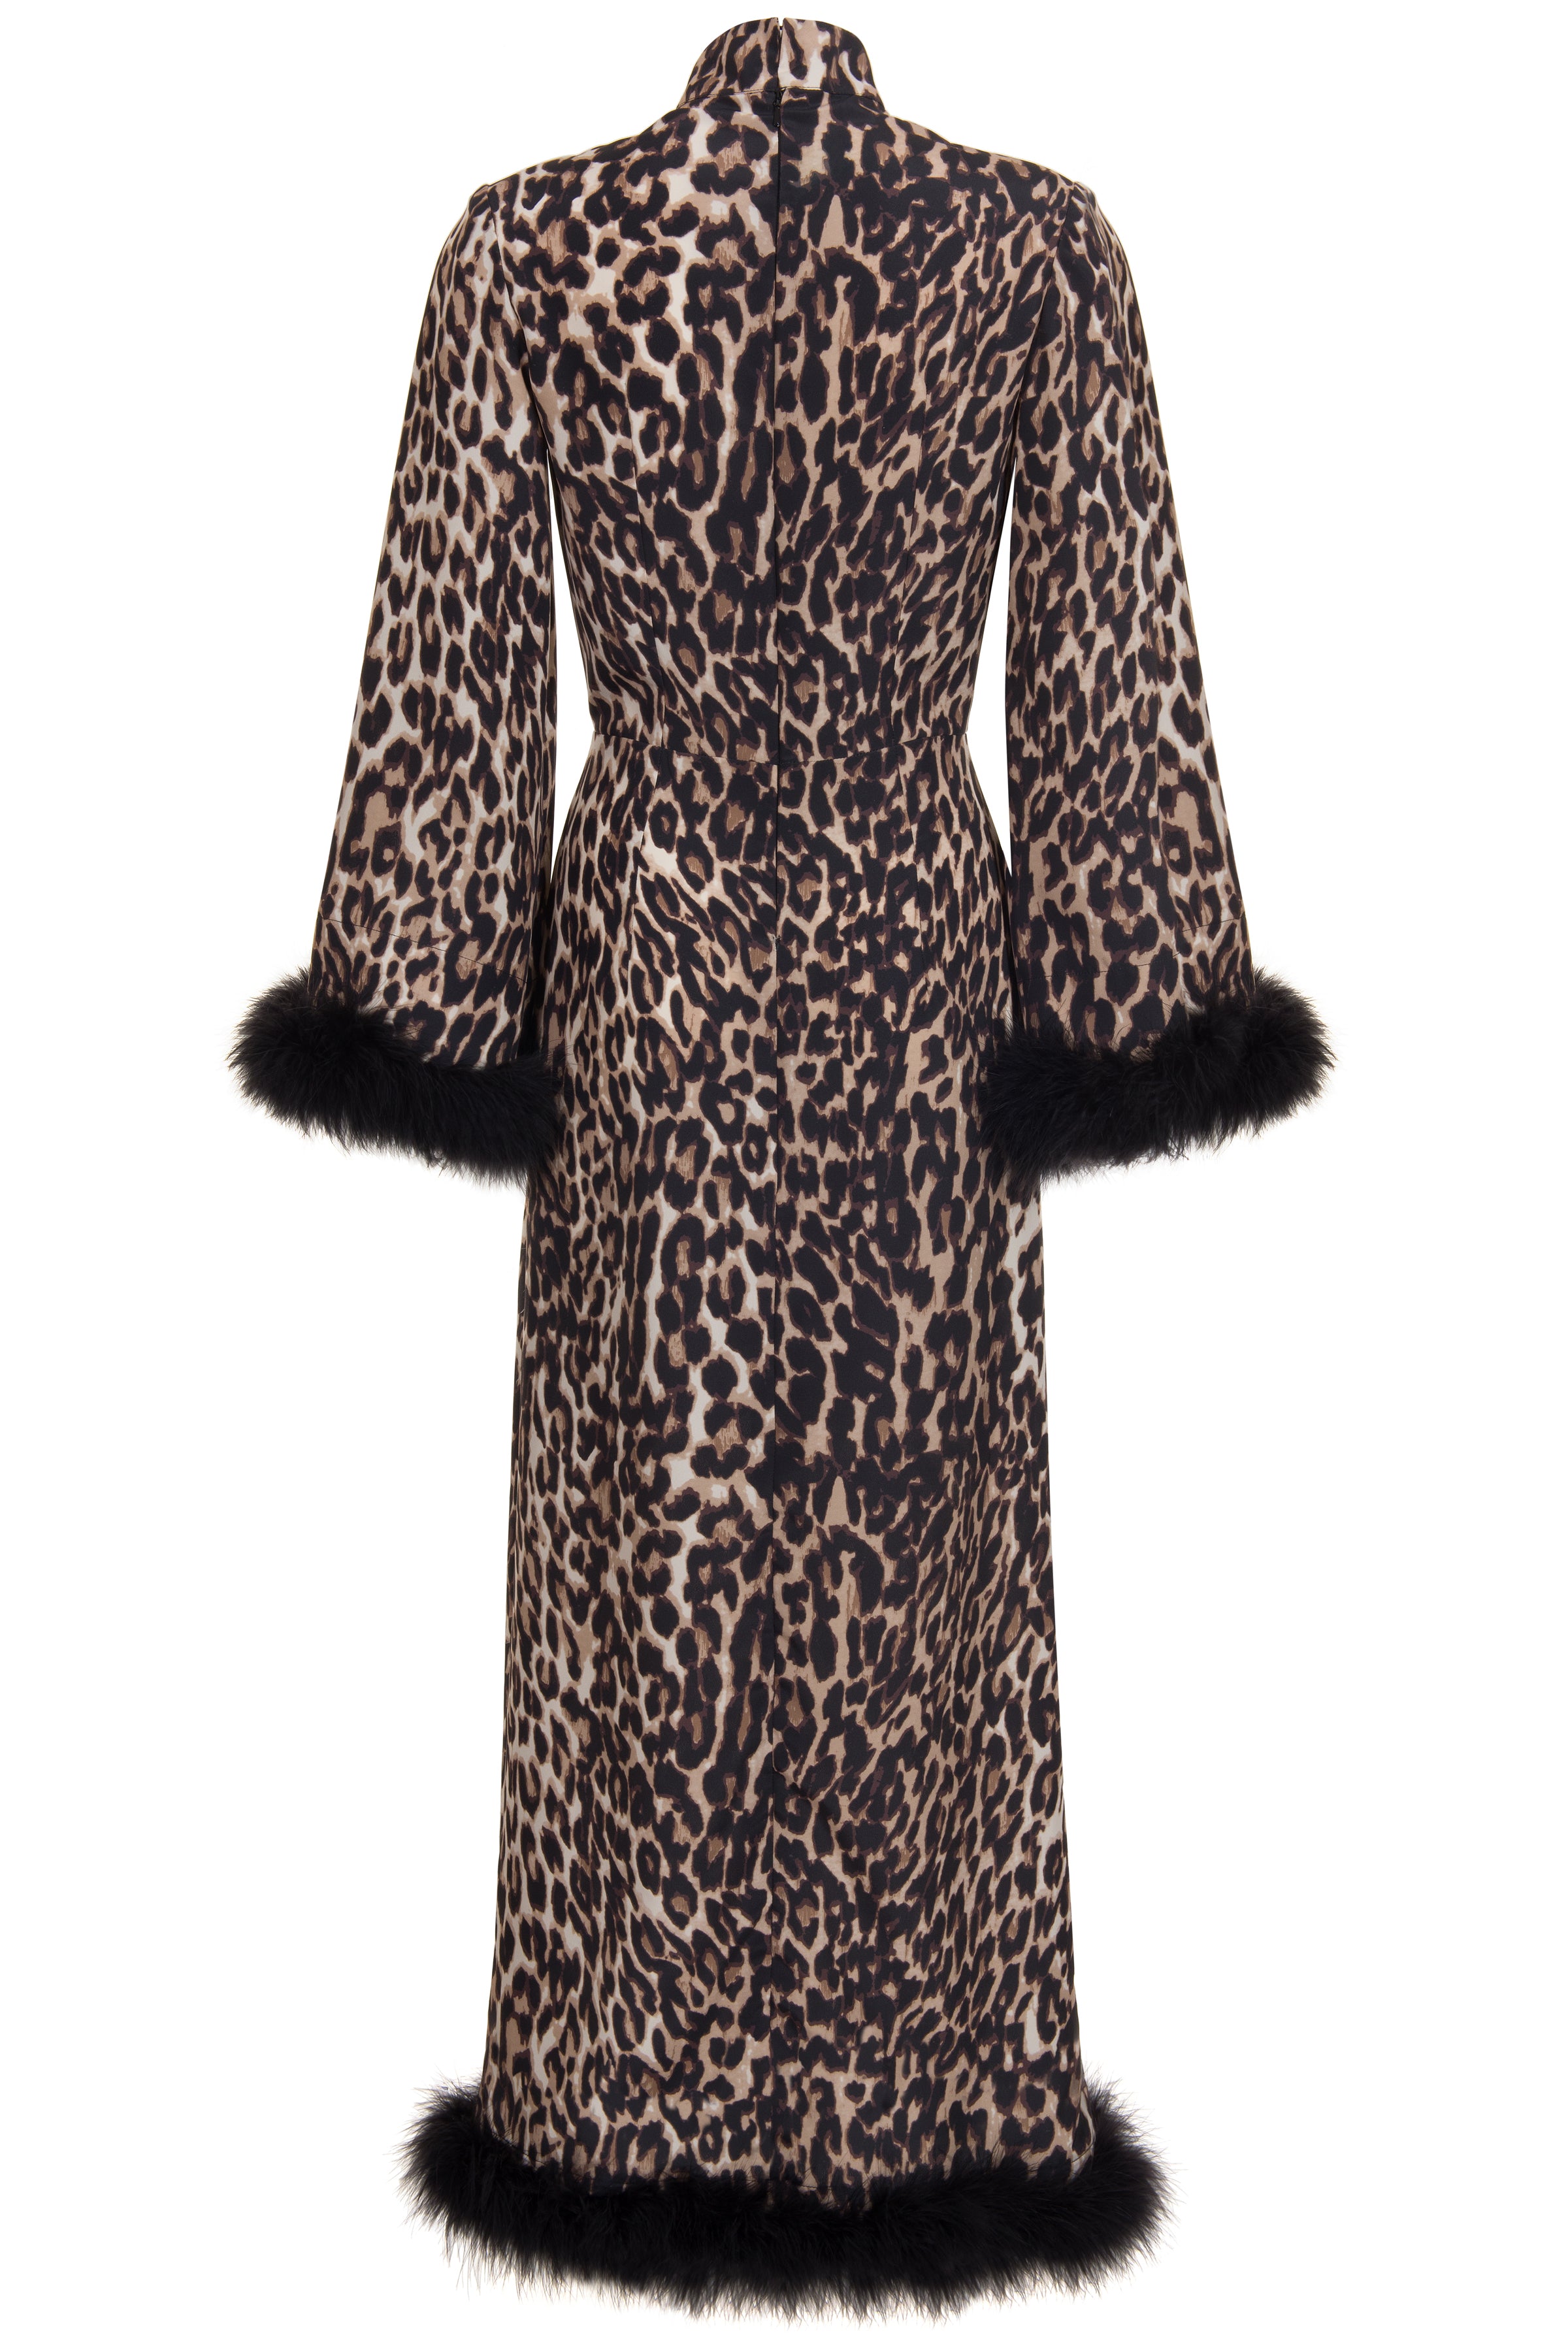 Liz Leopard Print Maxi Dress Trimmed in Marabou- Made to Order